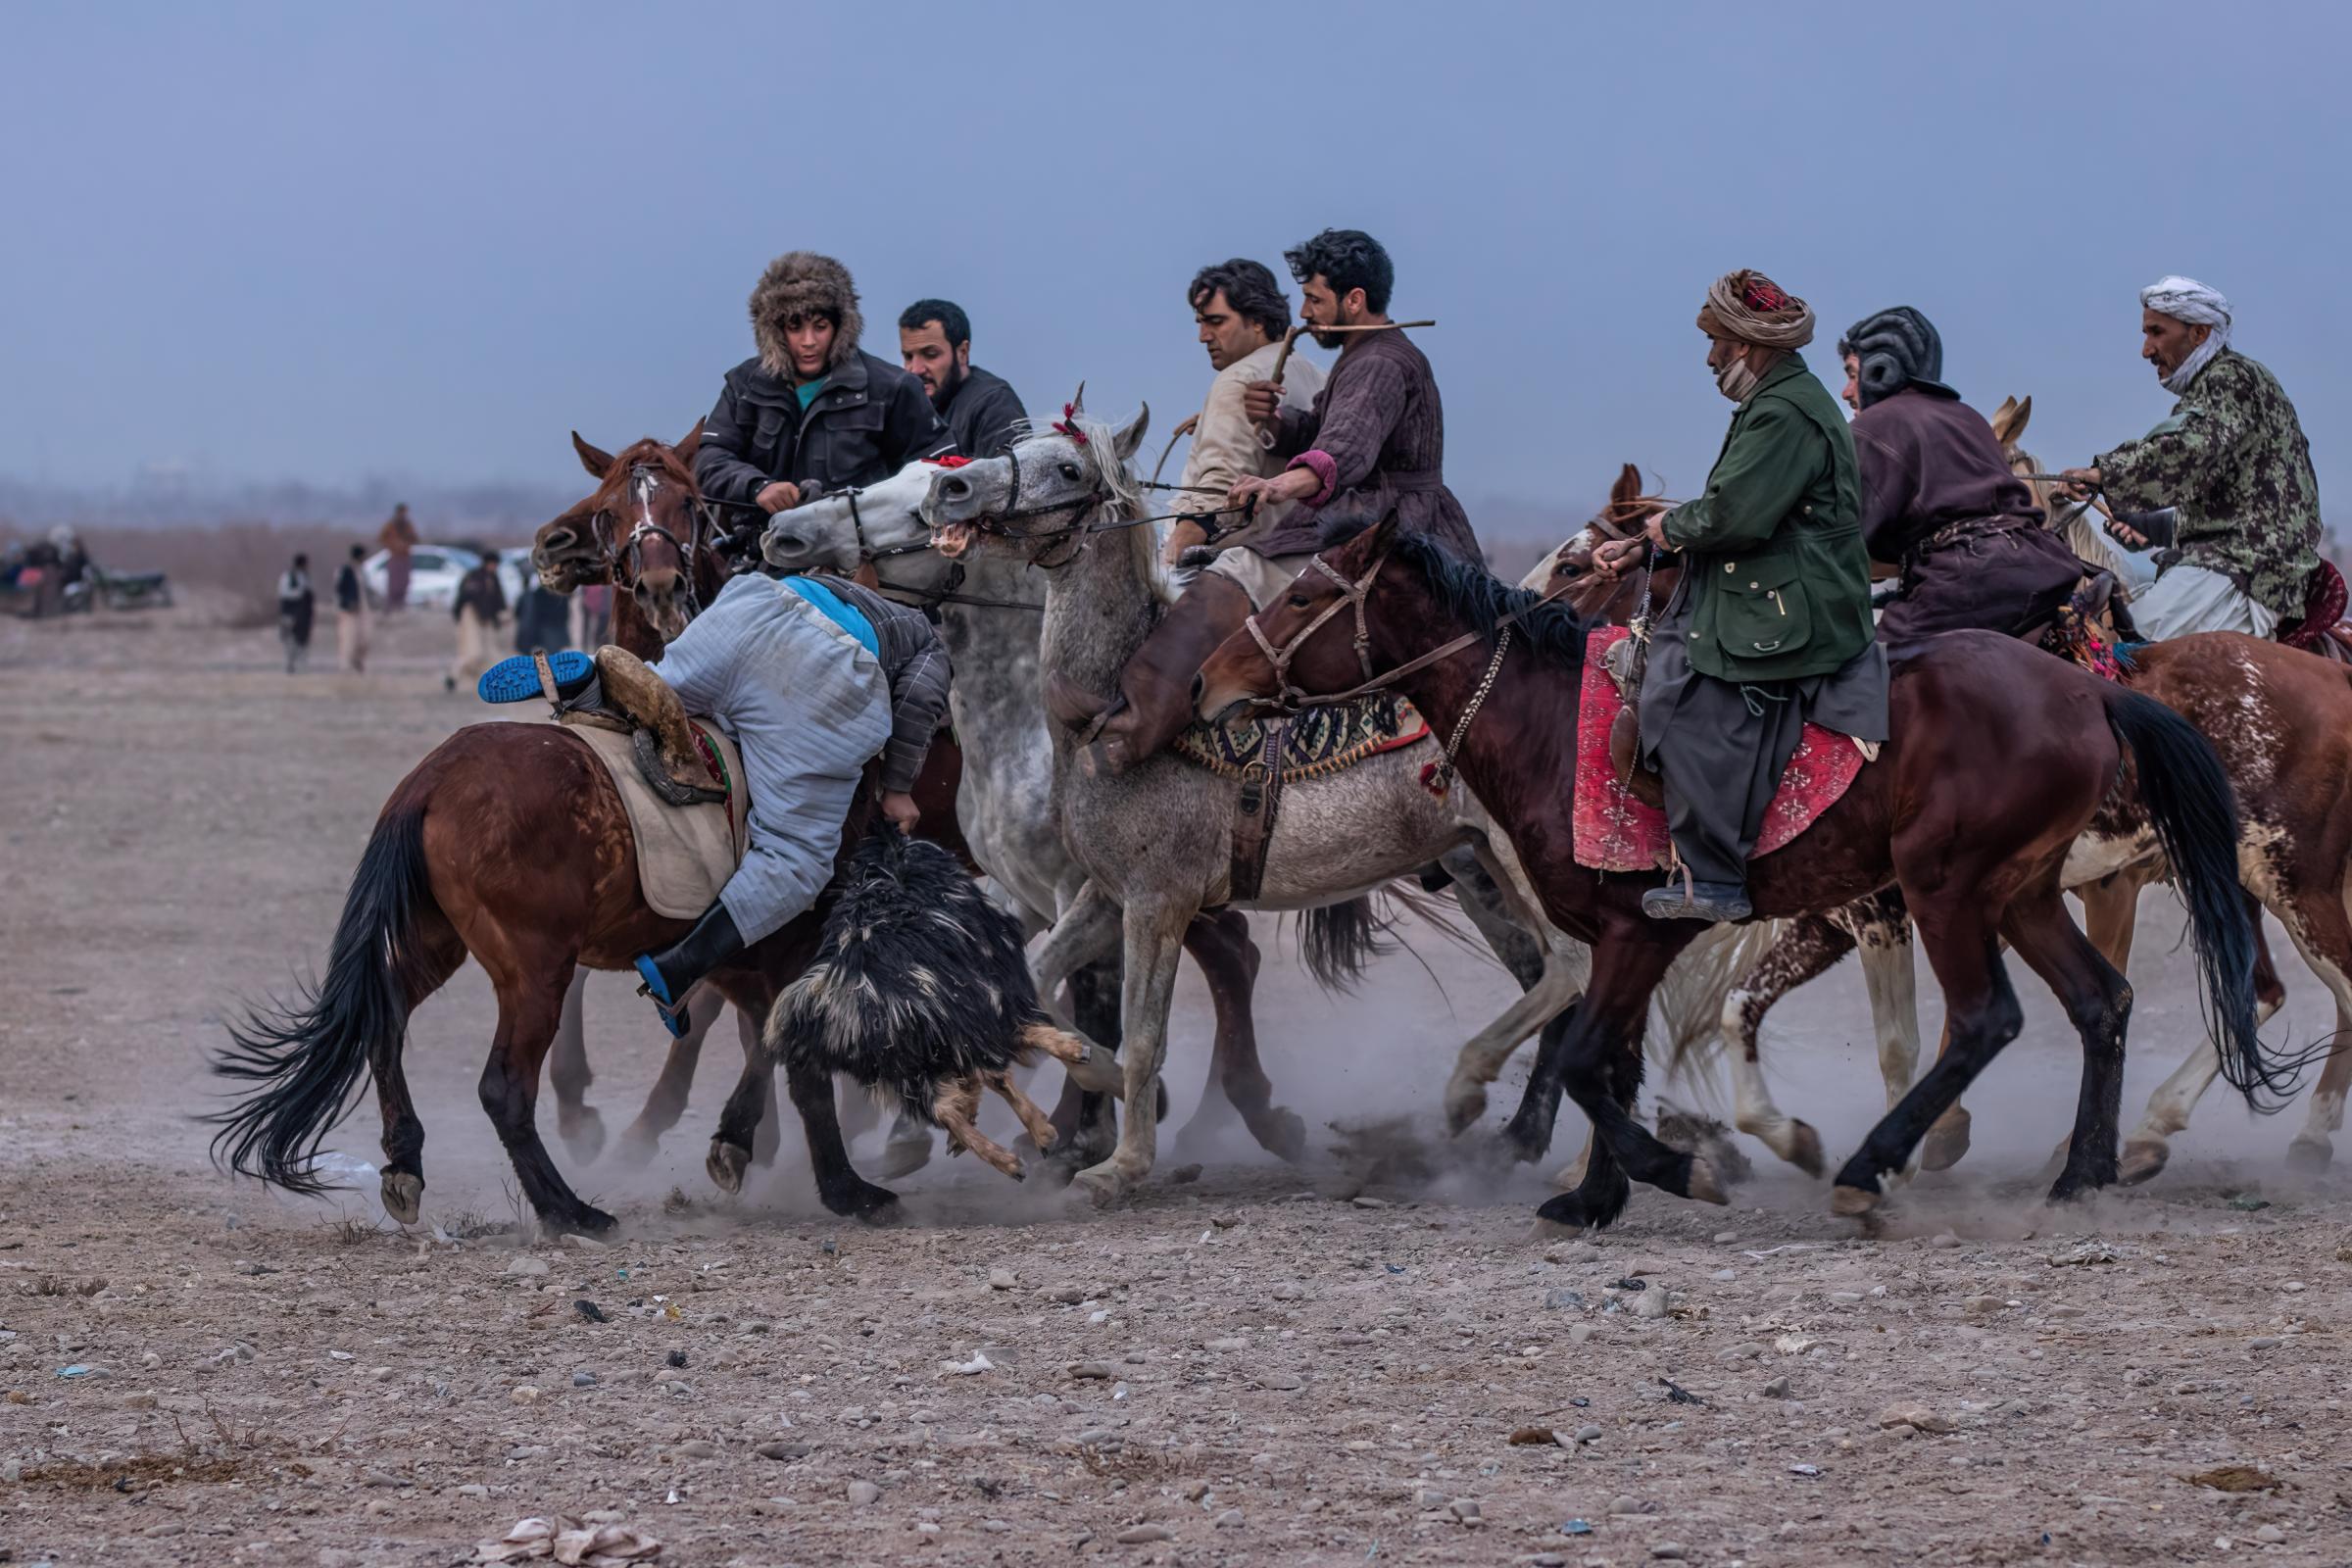 Buzkashi - The game consists of two main forms: Tudabarai and Qarajai. Tudabarai is considered to be the...